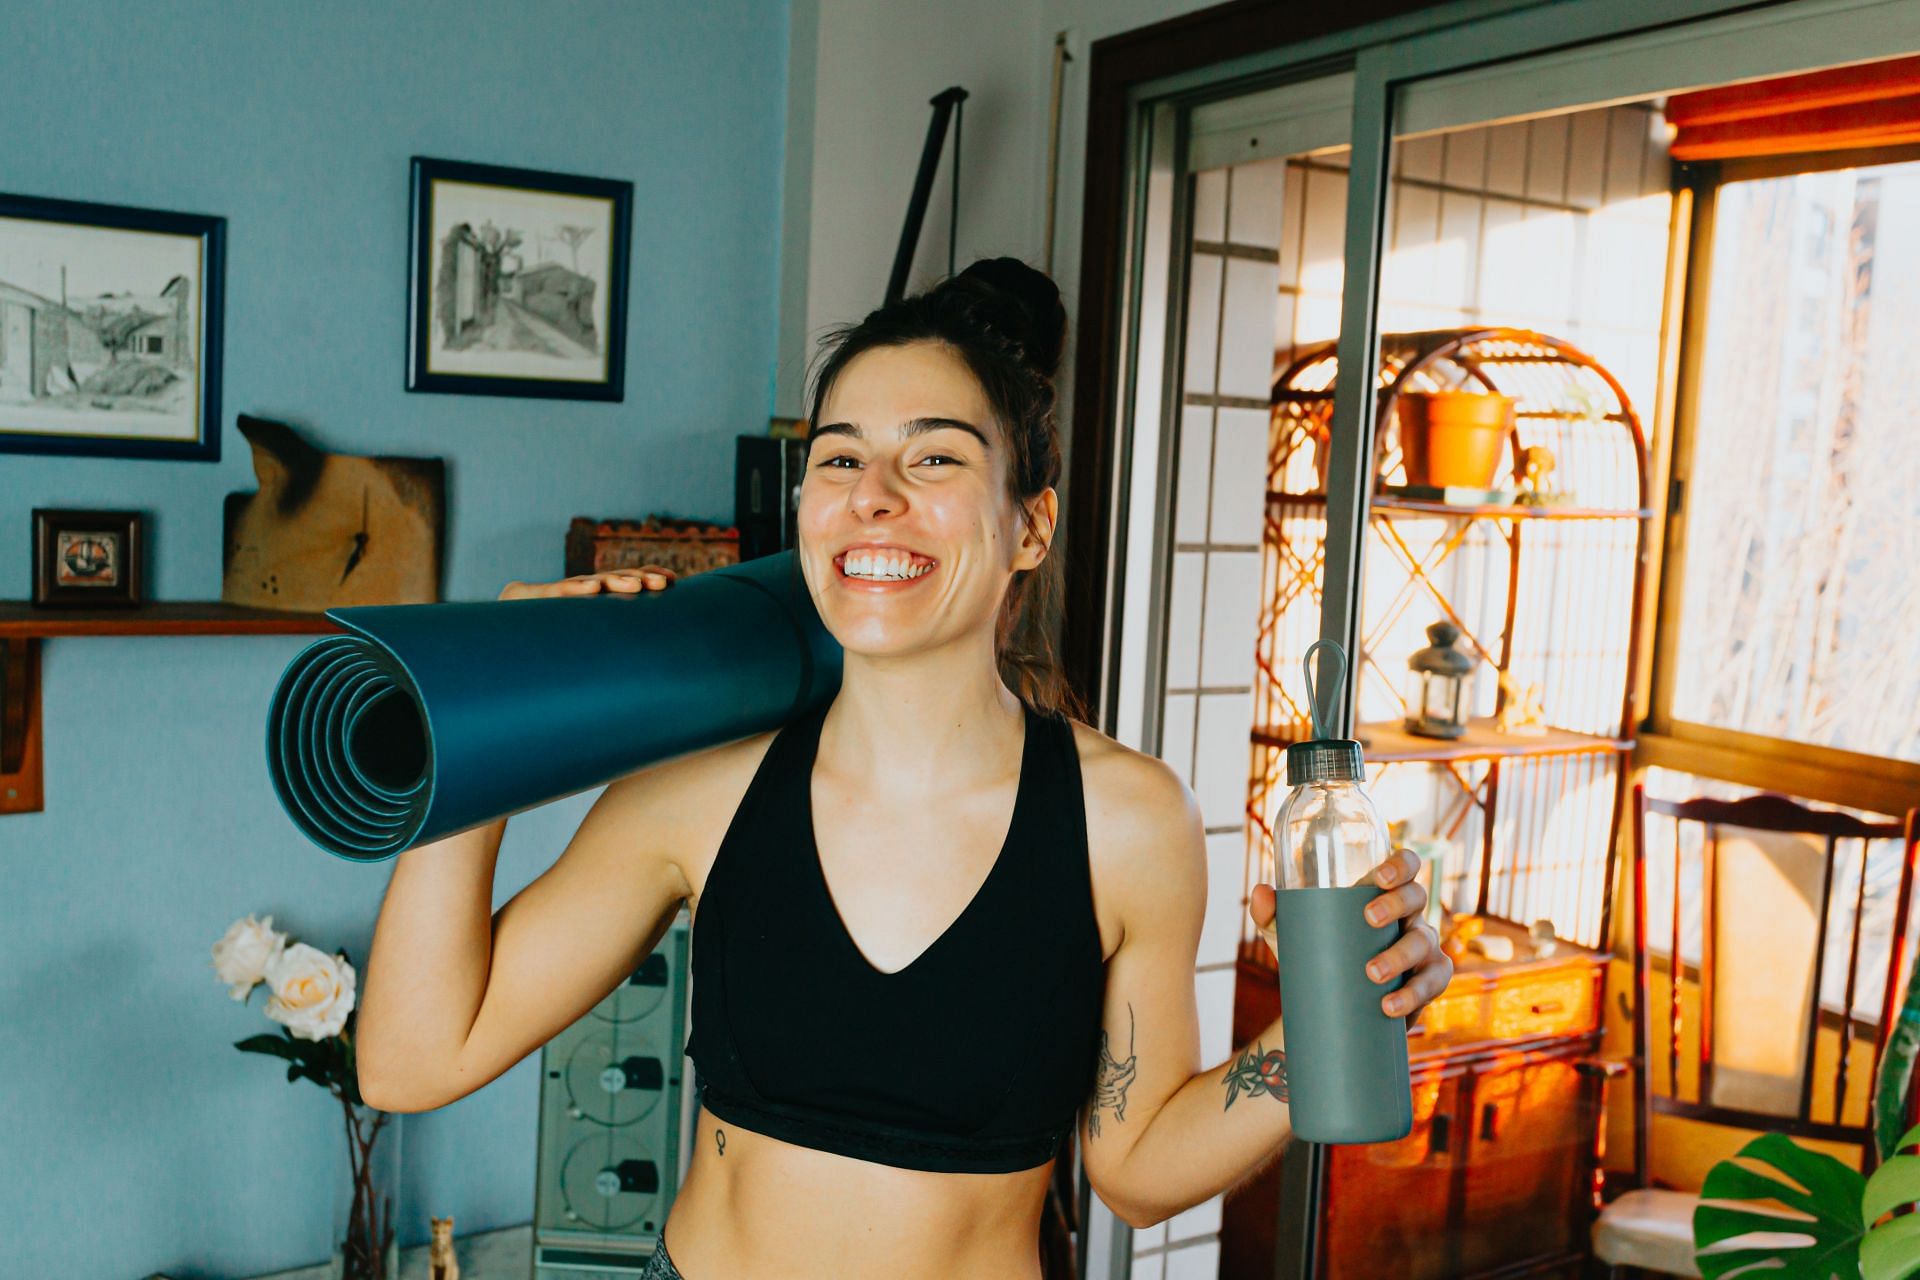 The greatest approach to burning those calories is to constantly perform fat loss exercises at home. (Image via Unsplash/ Ave Calvar)